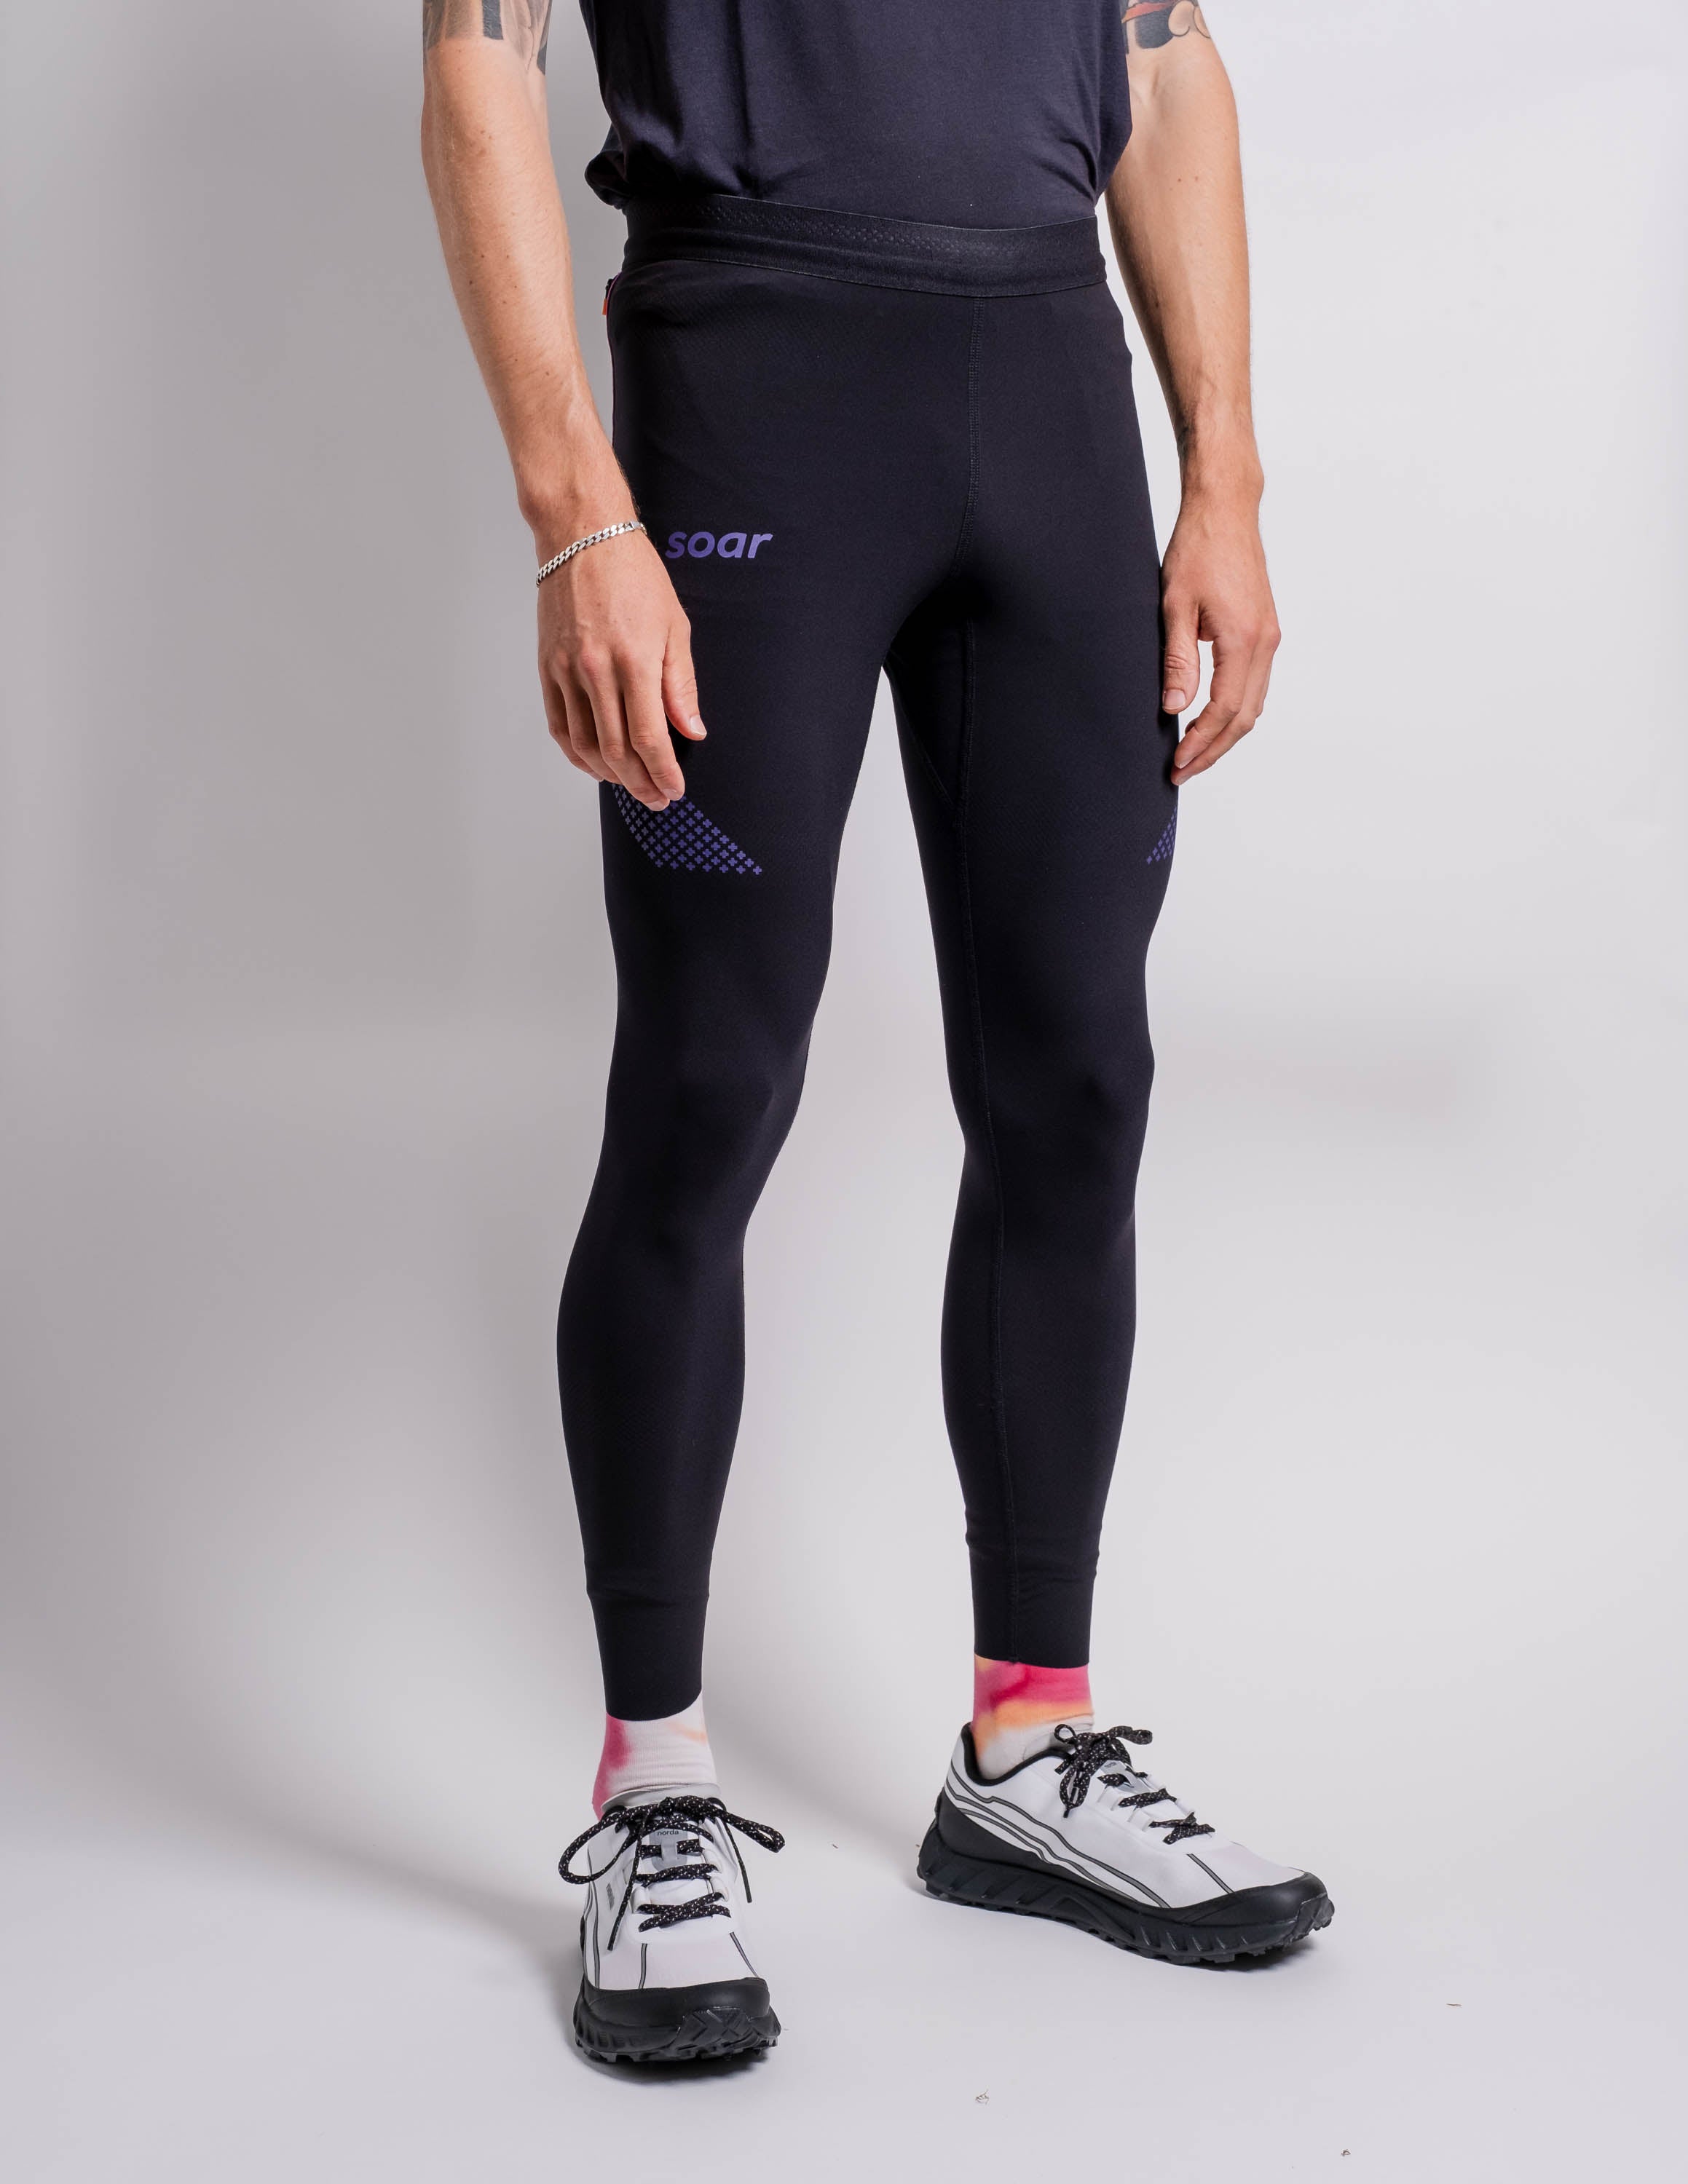 SOAR Run Tights review: leggings that grip for a secure fit